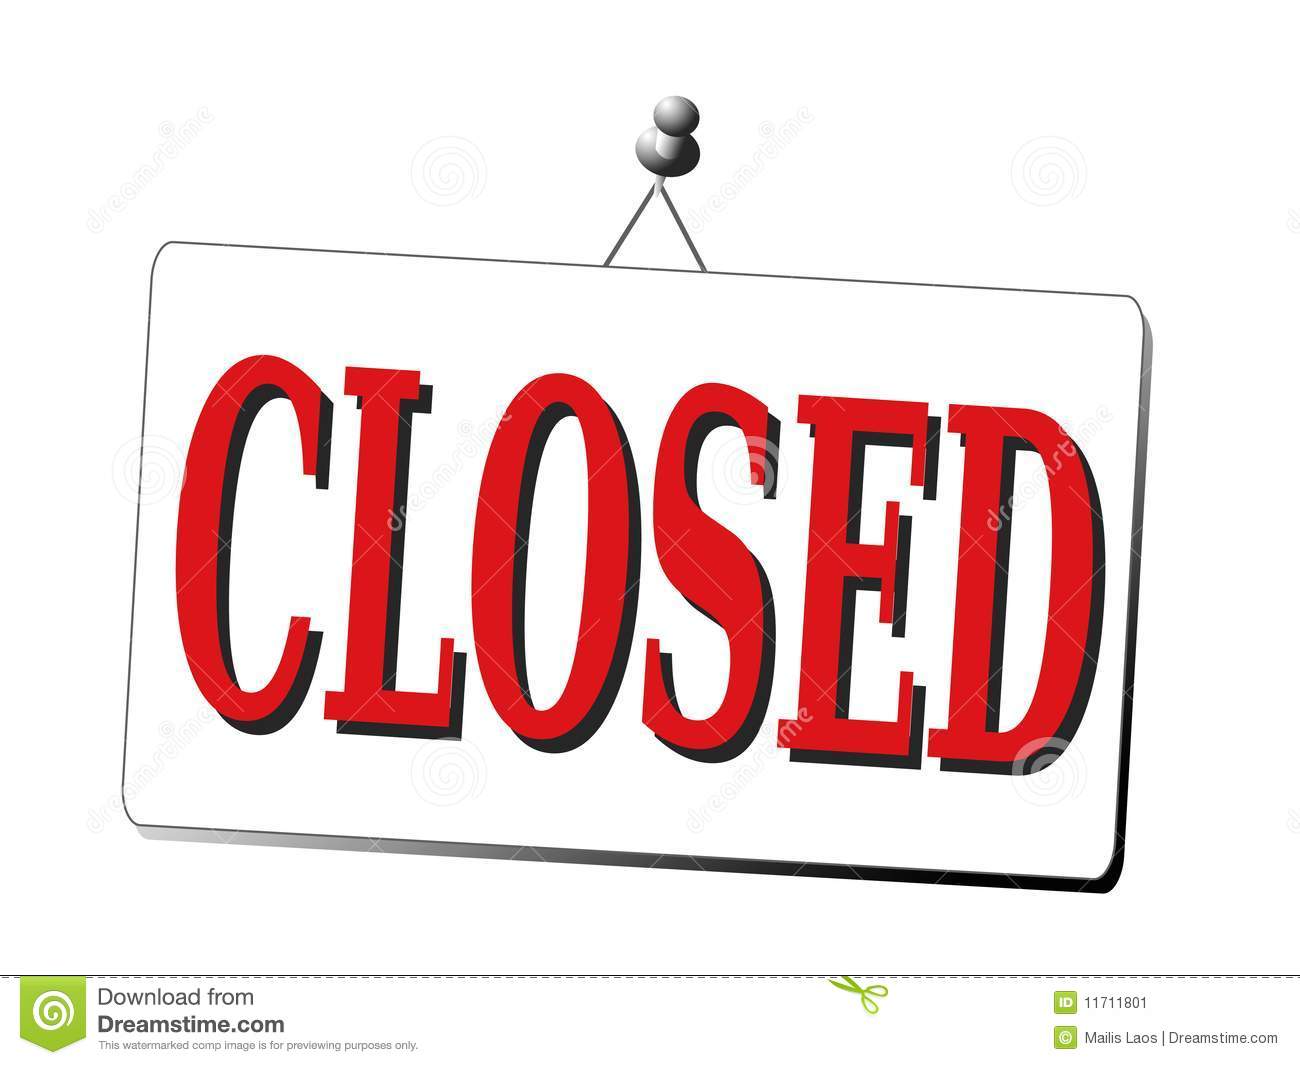 Closed Sign Isolated Stock Image   Image  11711801